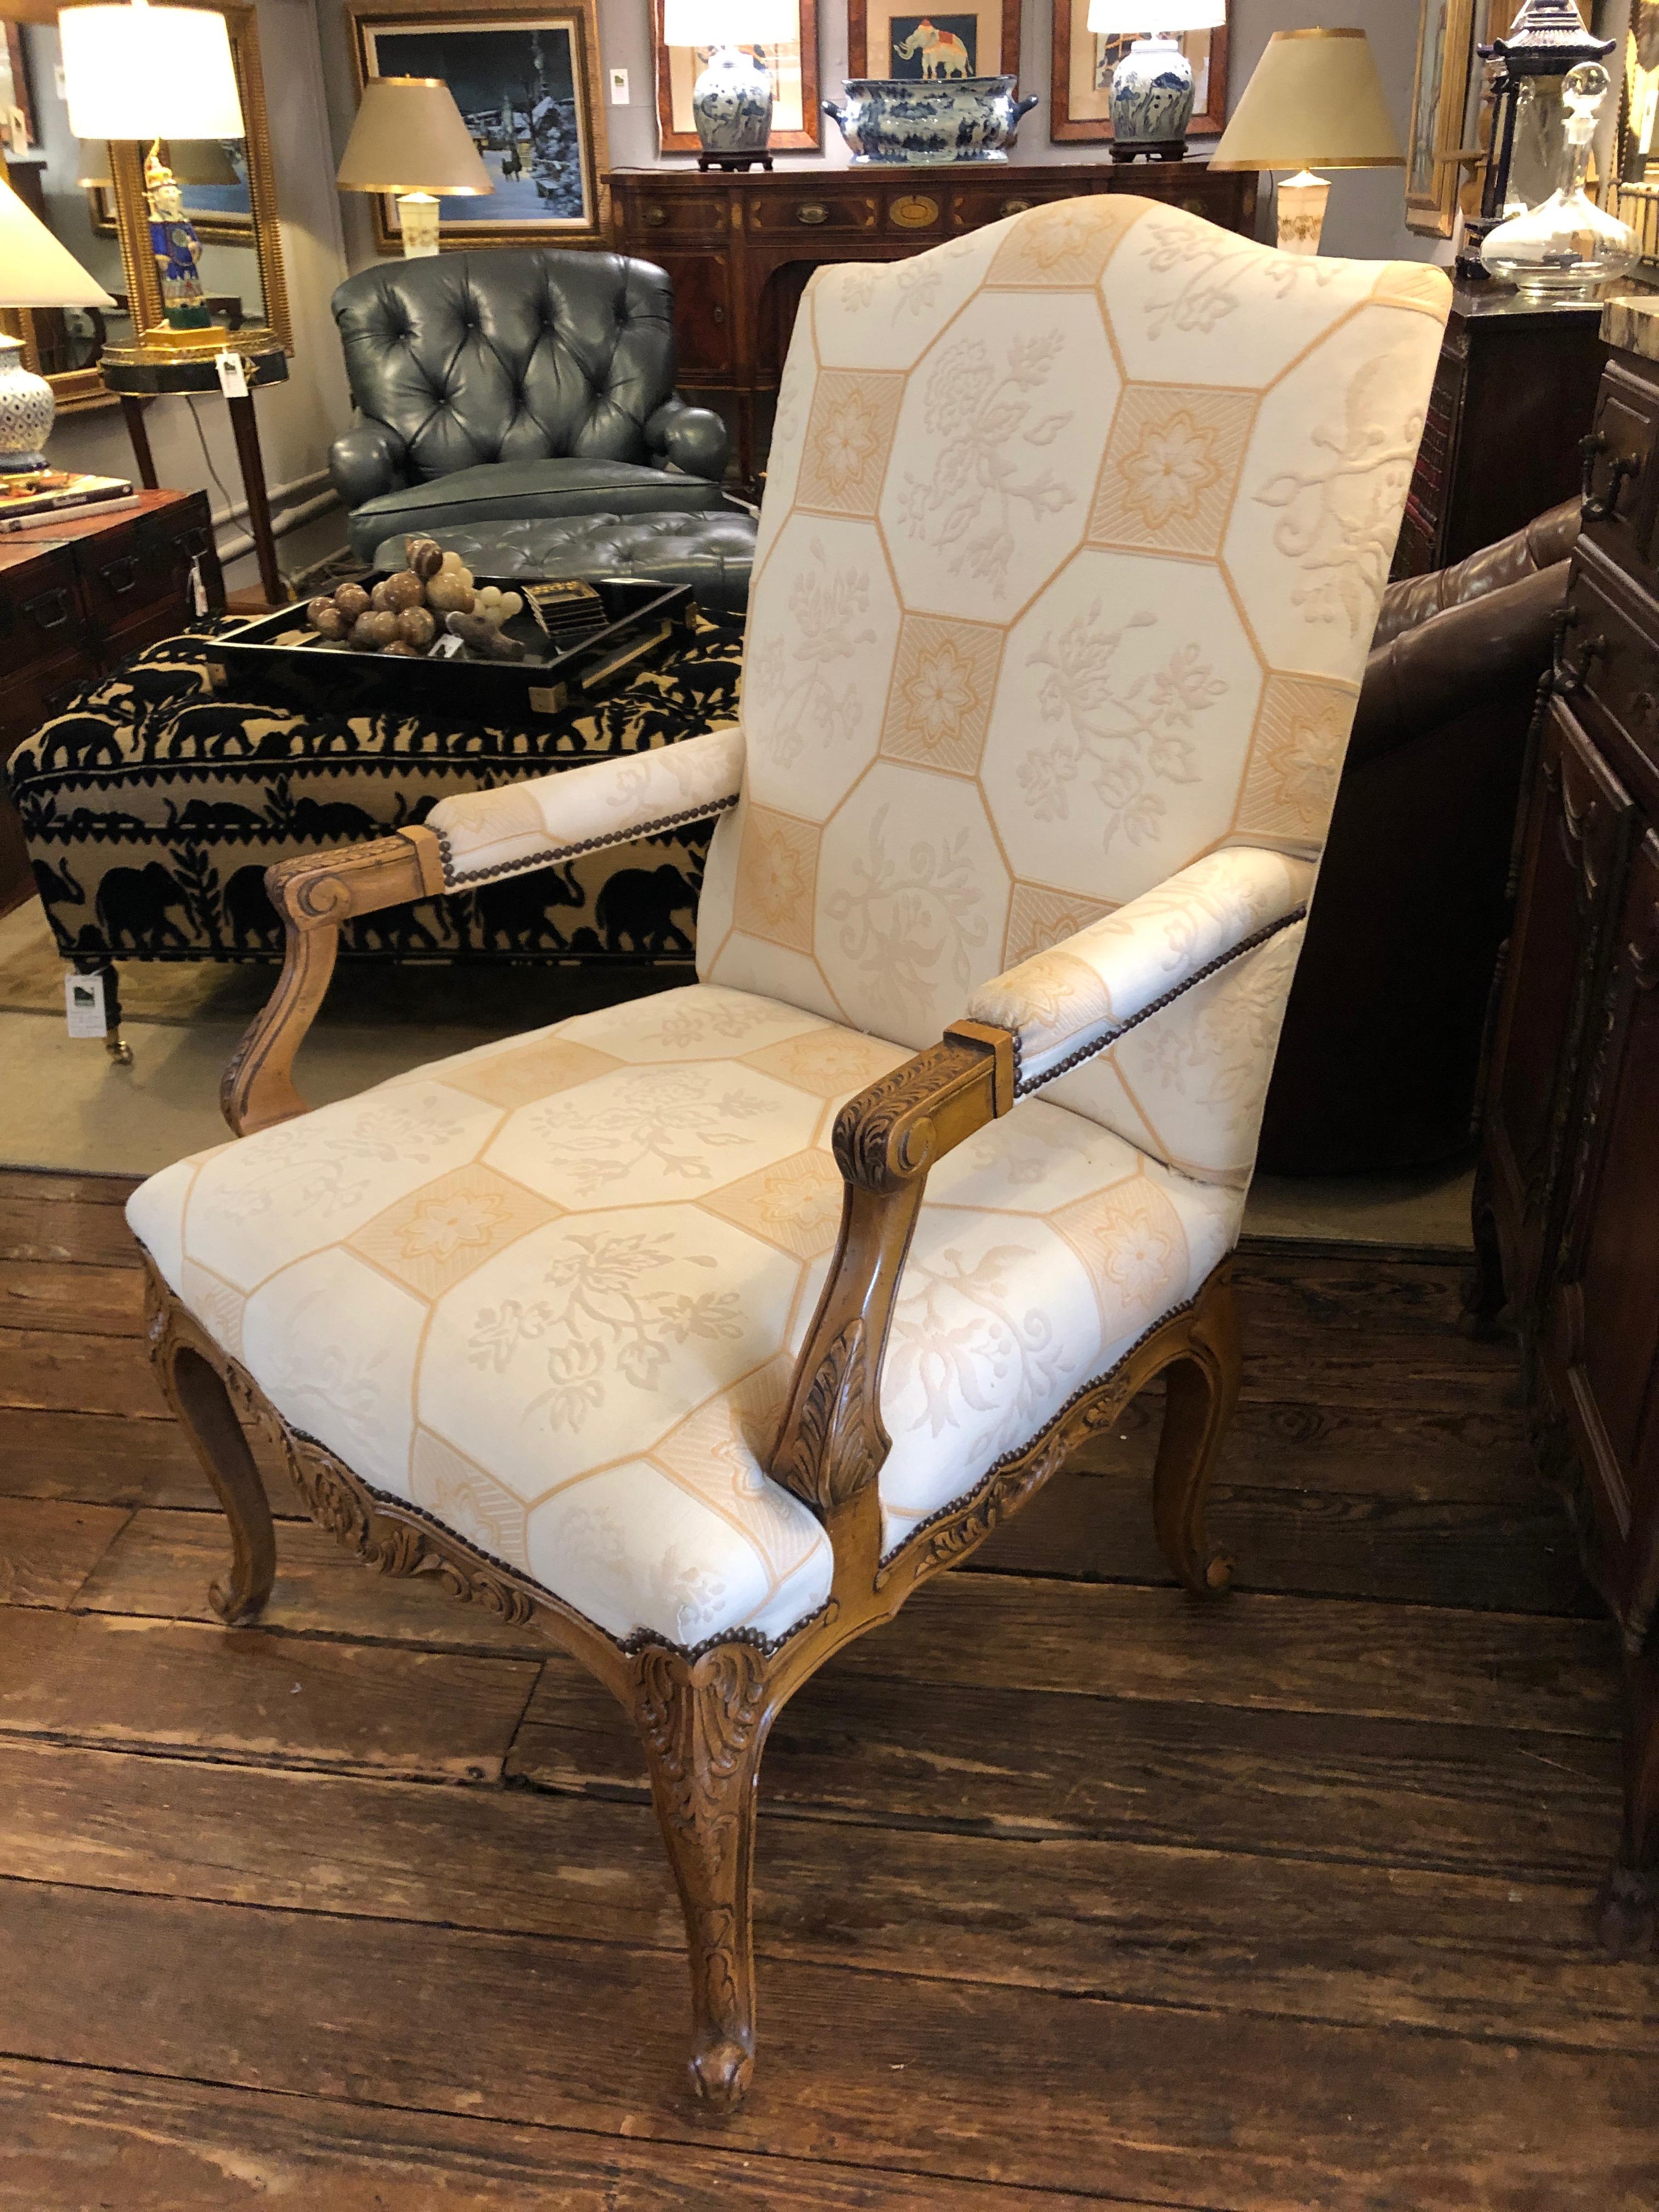 A beautiful roomy carved wood armchair having light color wood, cabriole legs, and neutral beige and tan geometric upholstery.